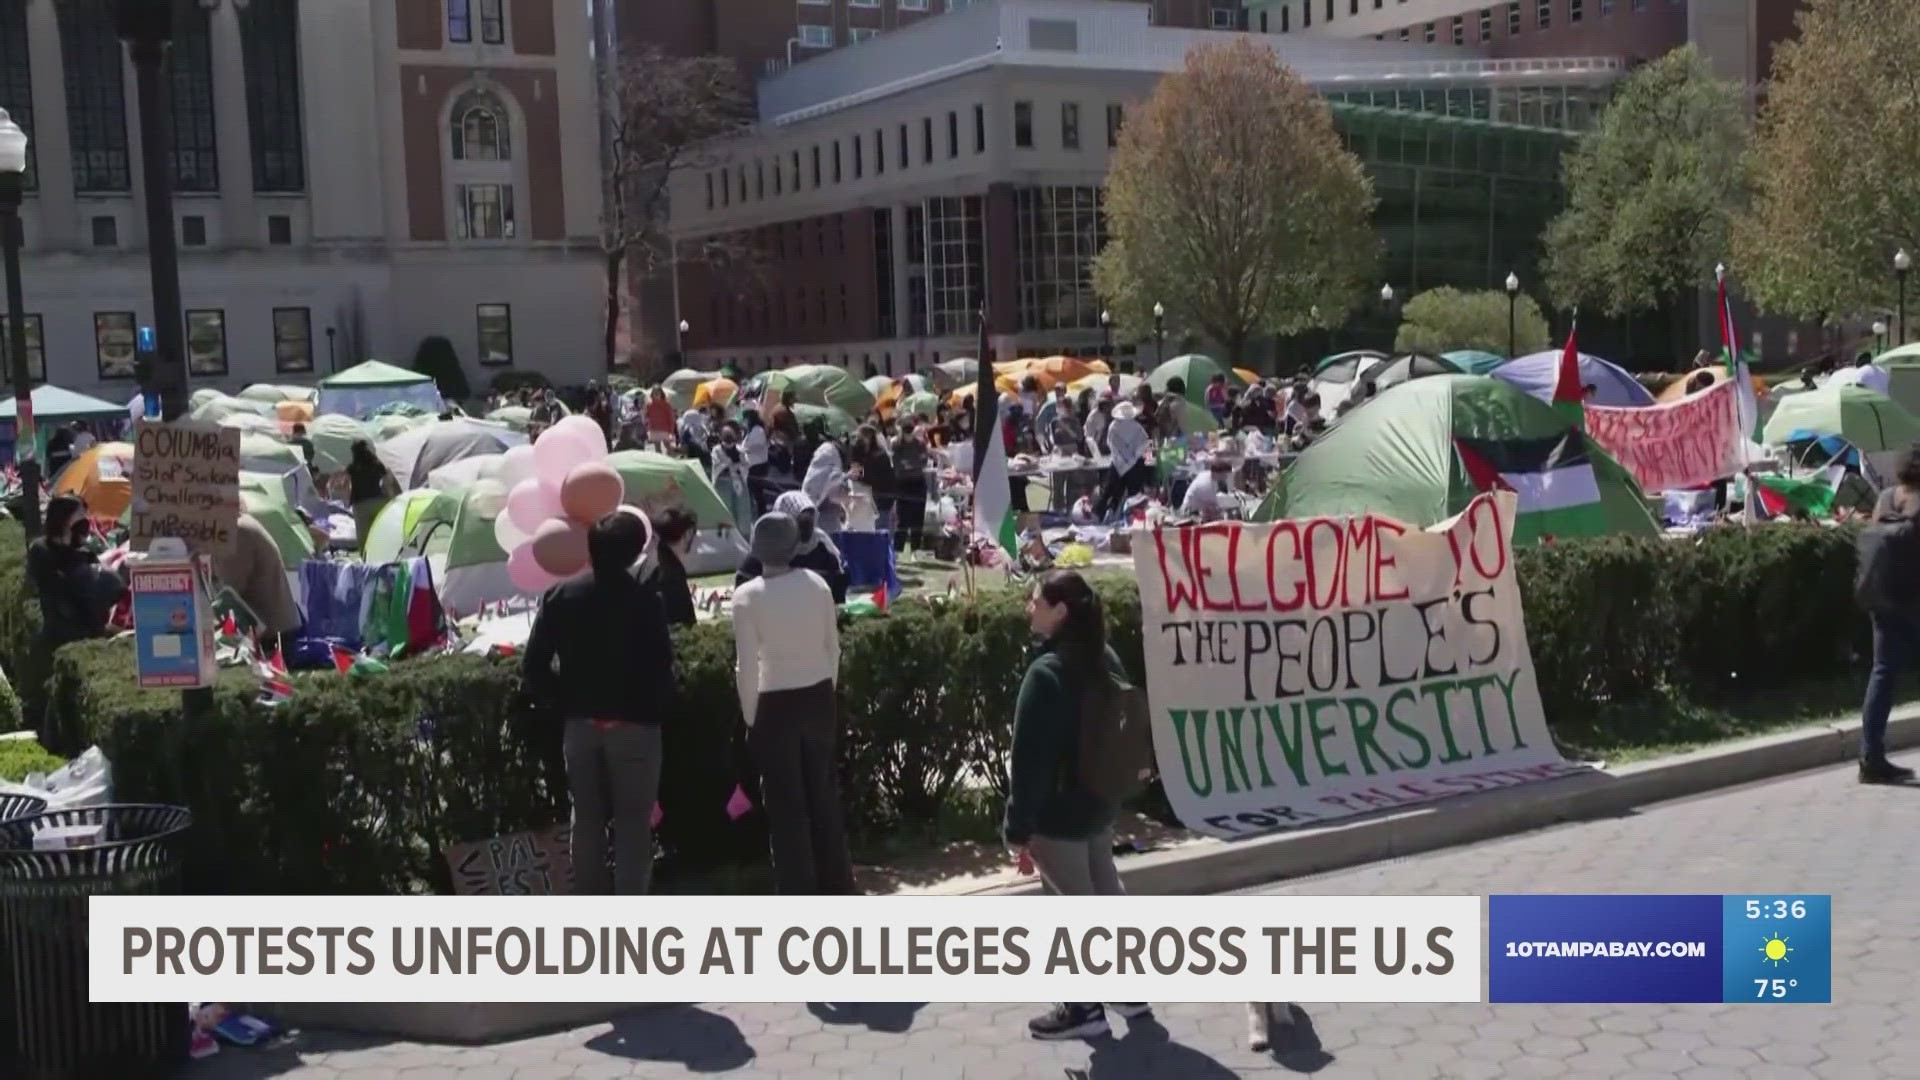 Right now, the number of Pro-Palestinian protests on college campuses around the country is continuing to grow.